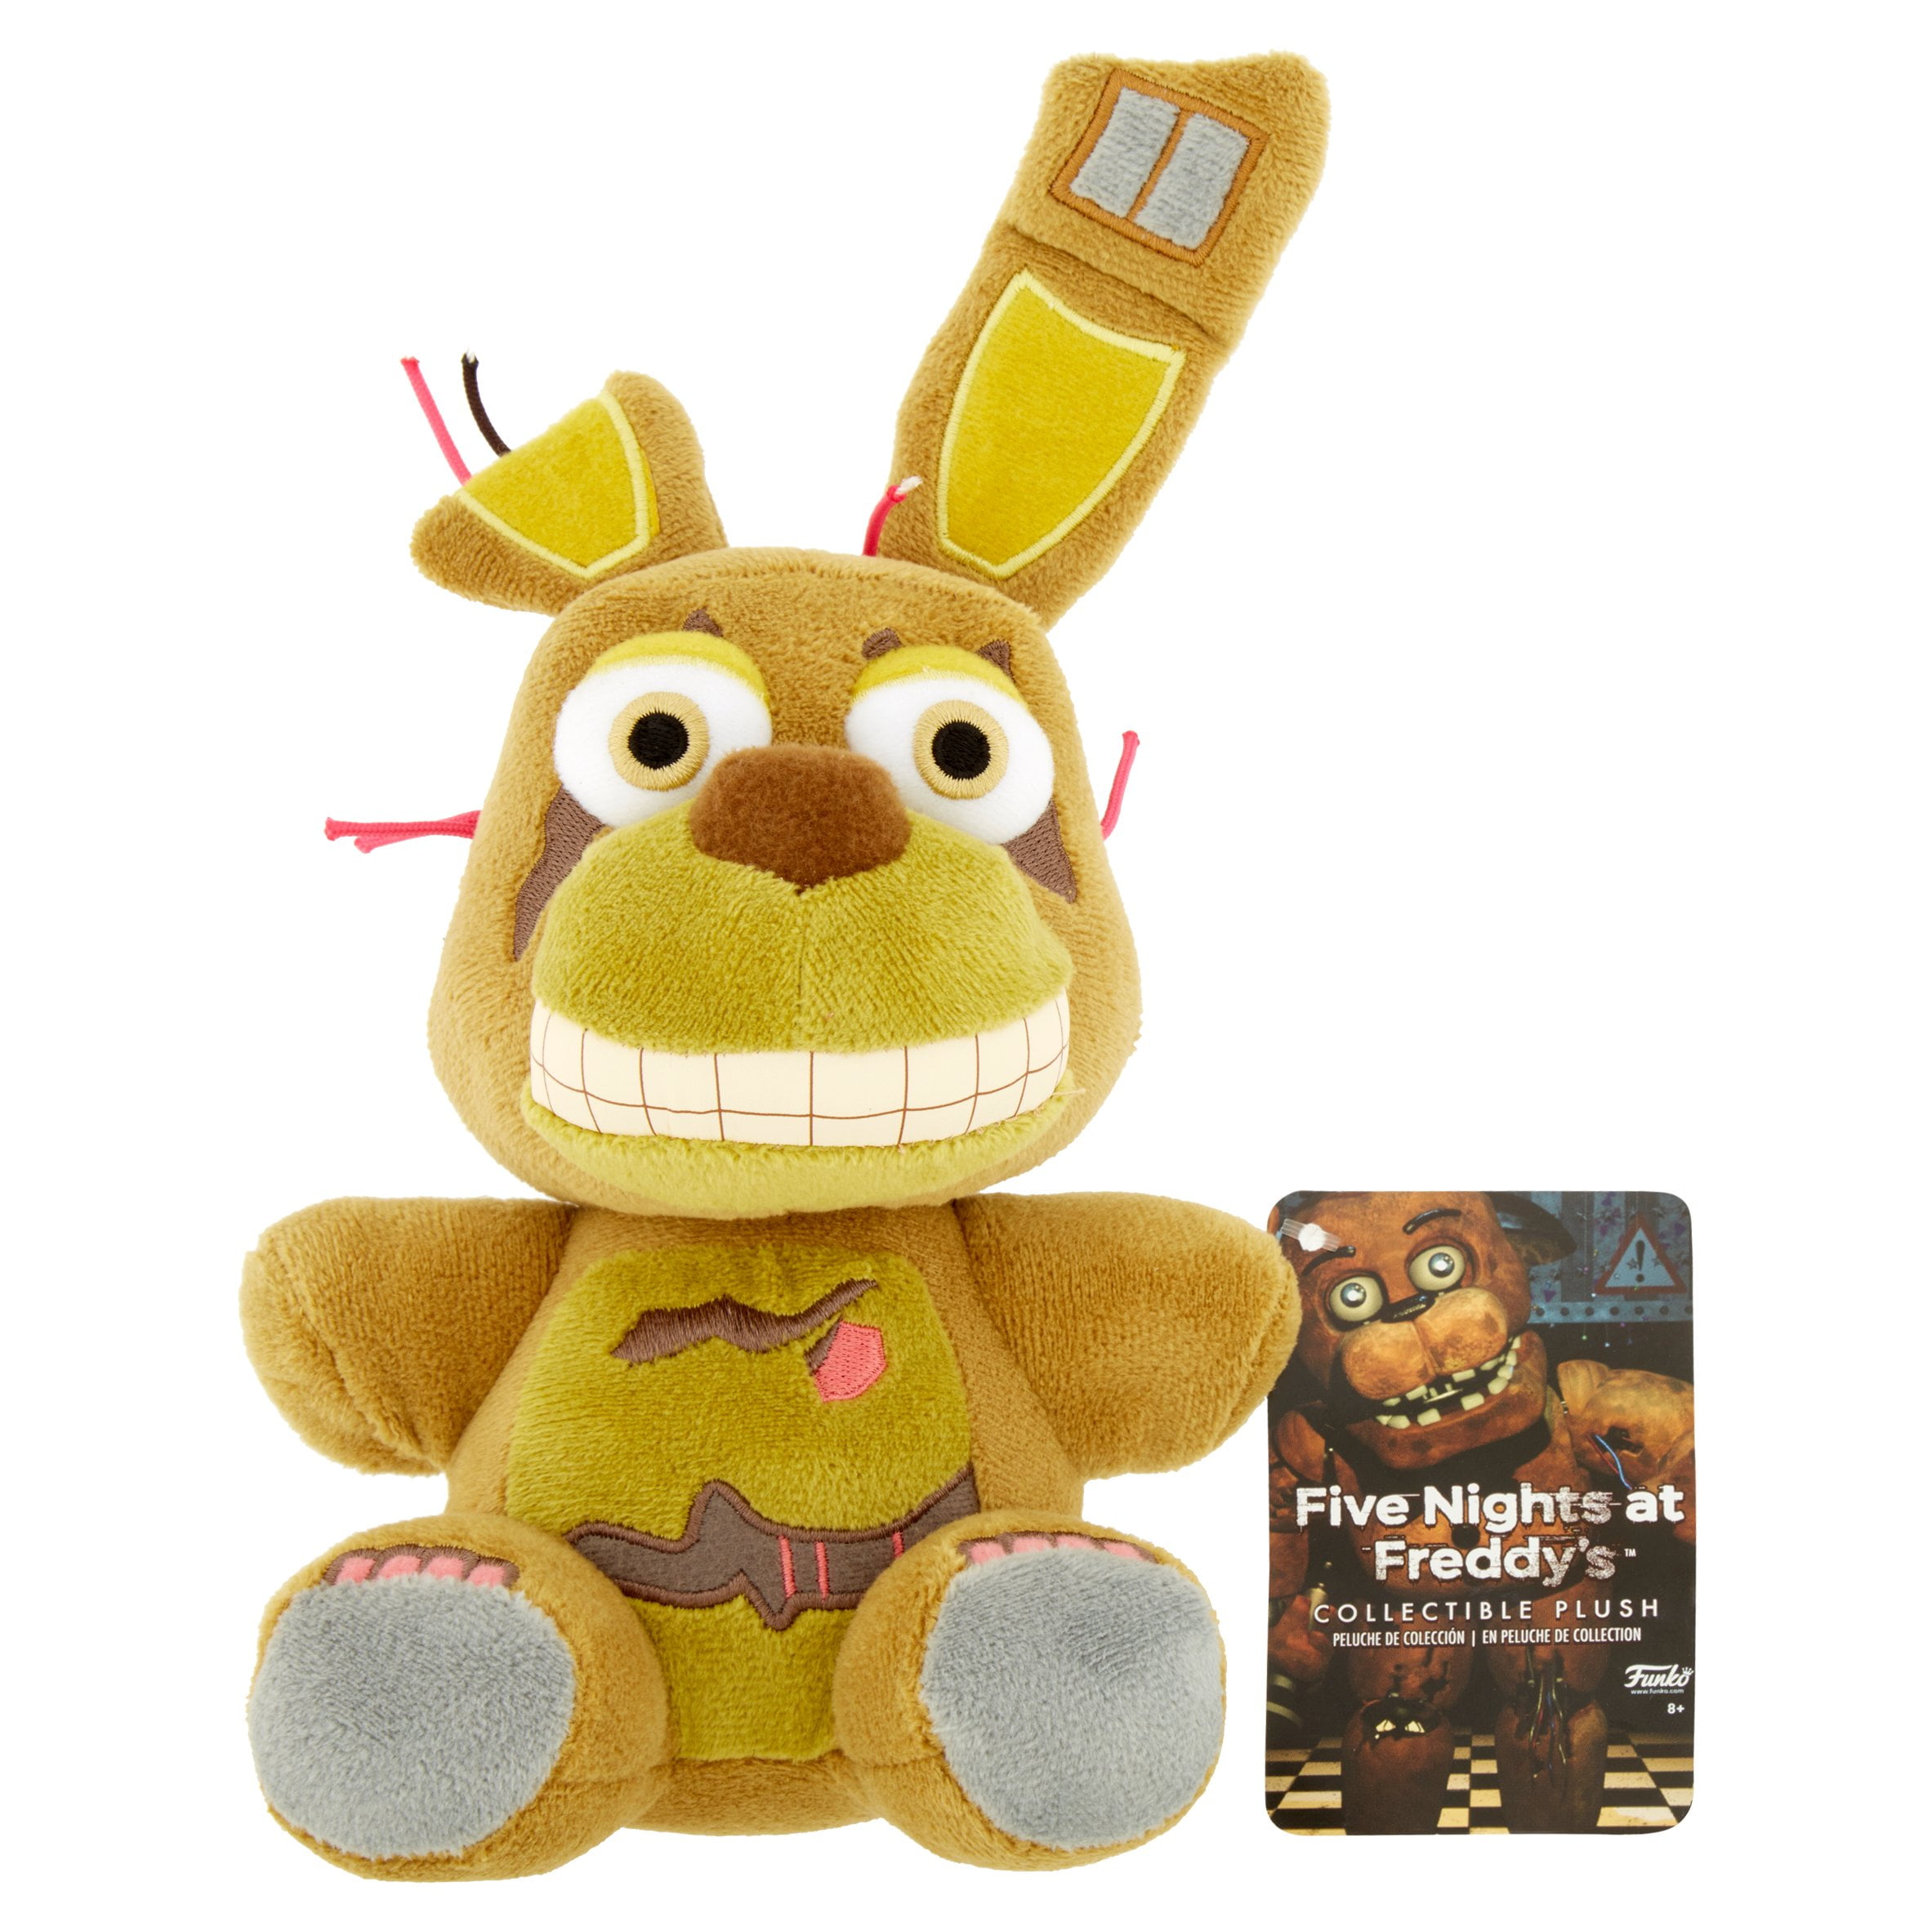 five nights at freddy's collectible plush Off 65% - www 